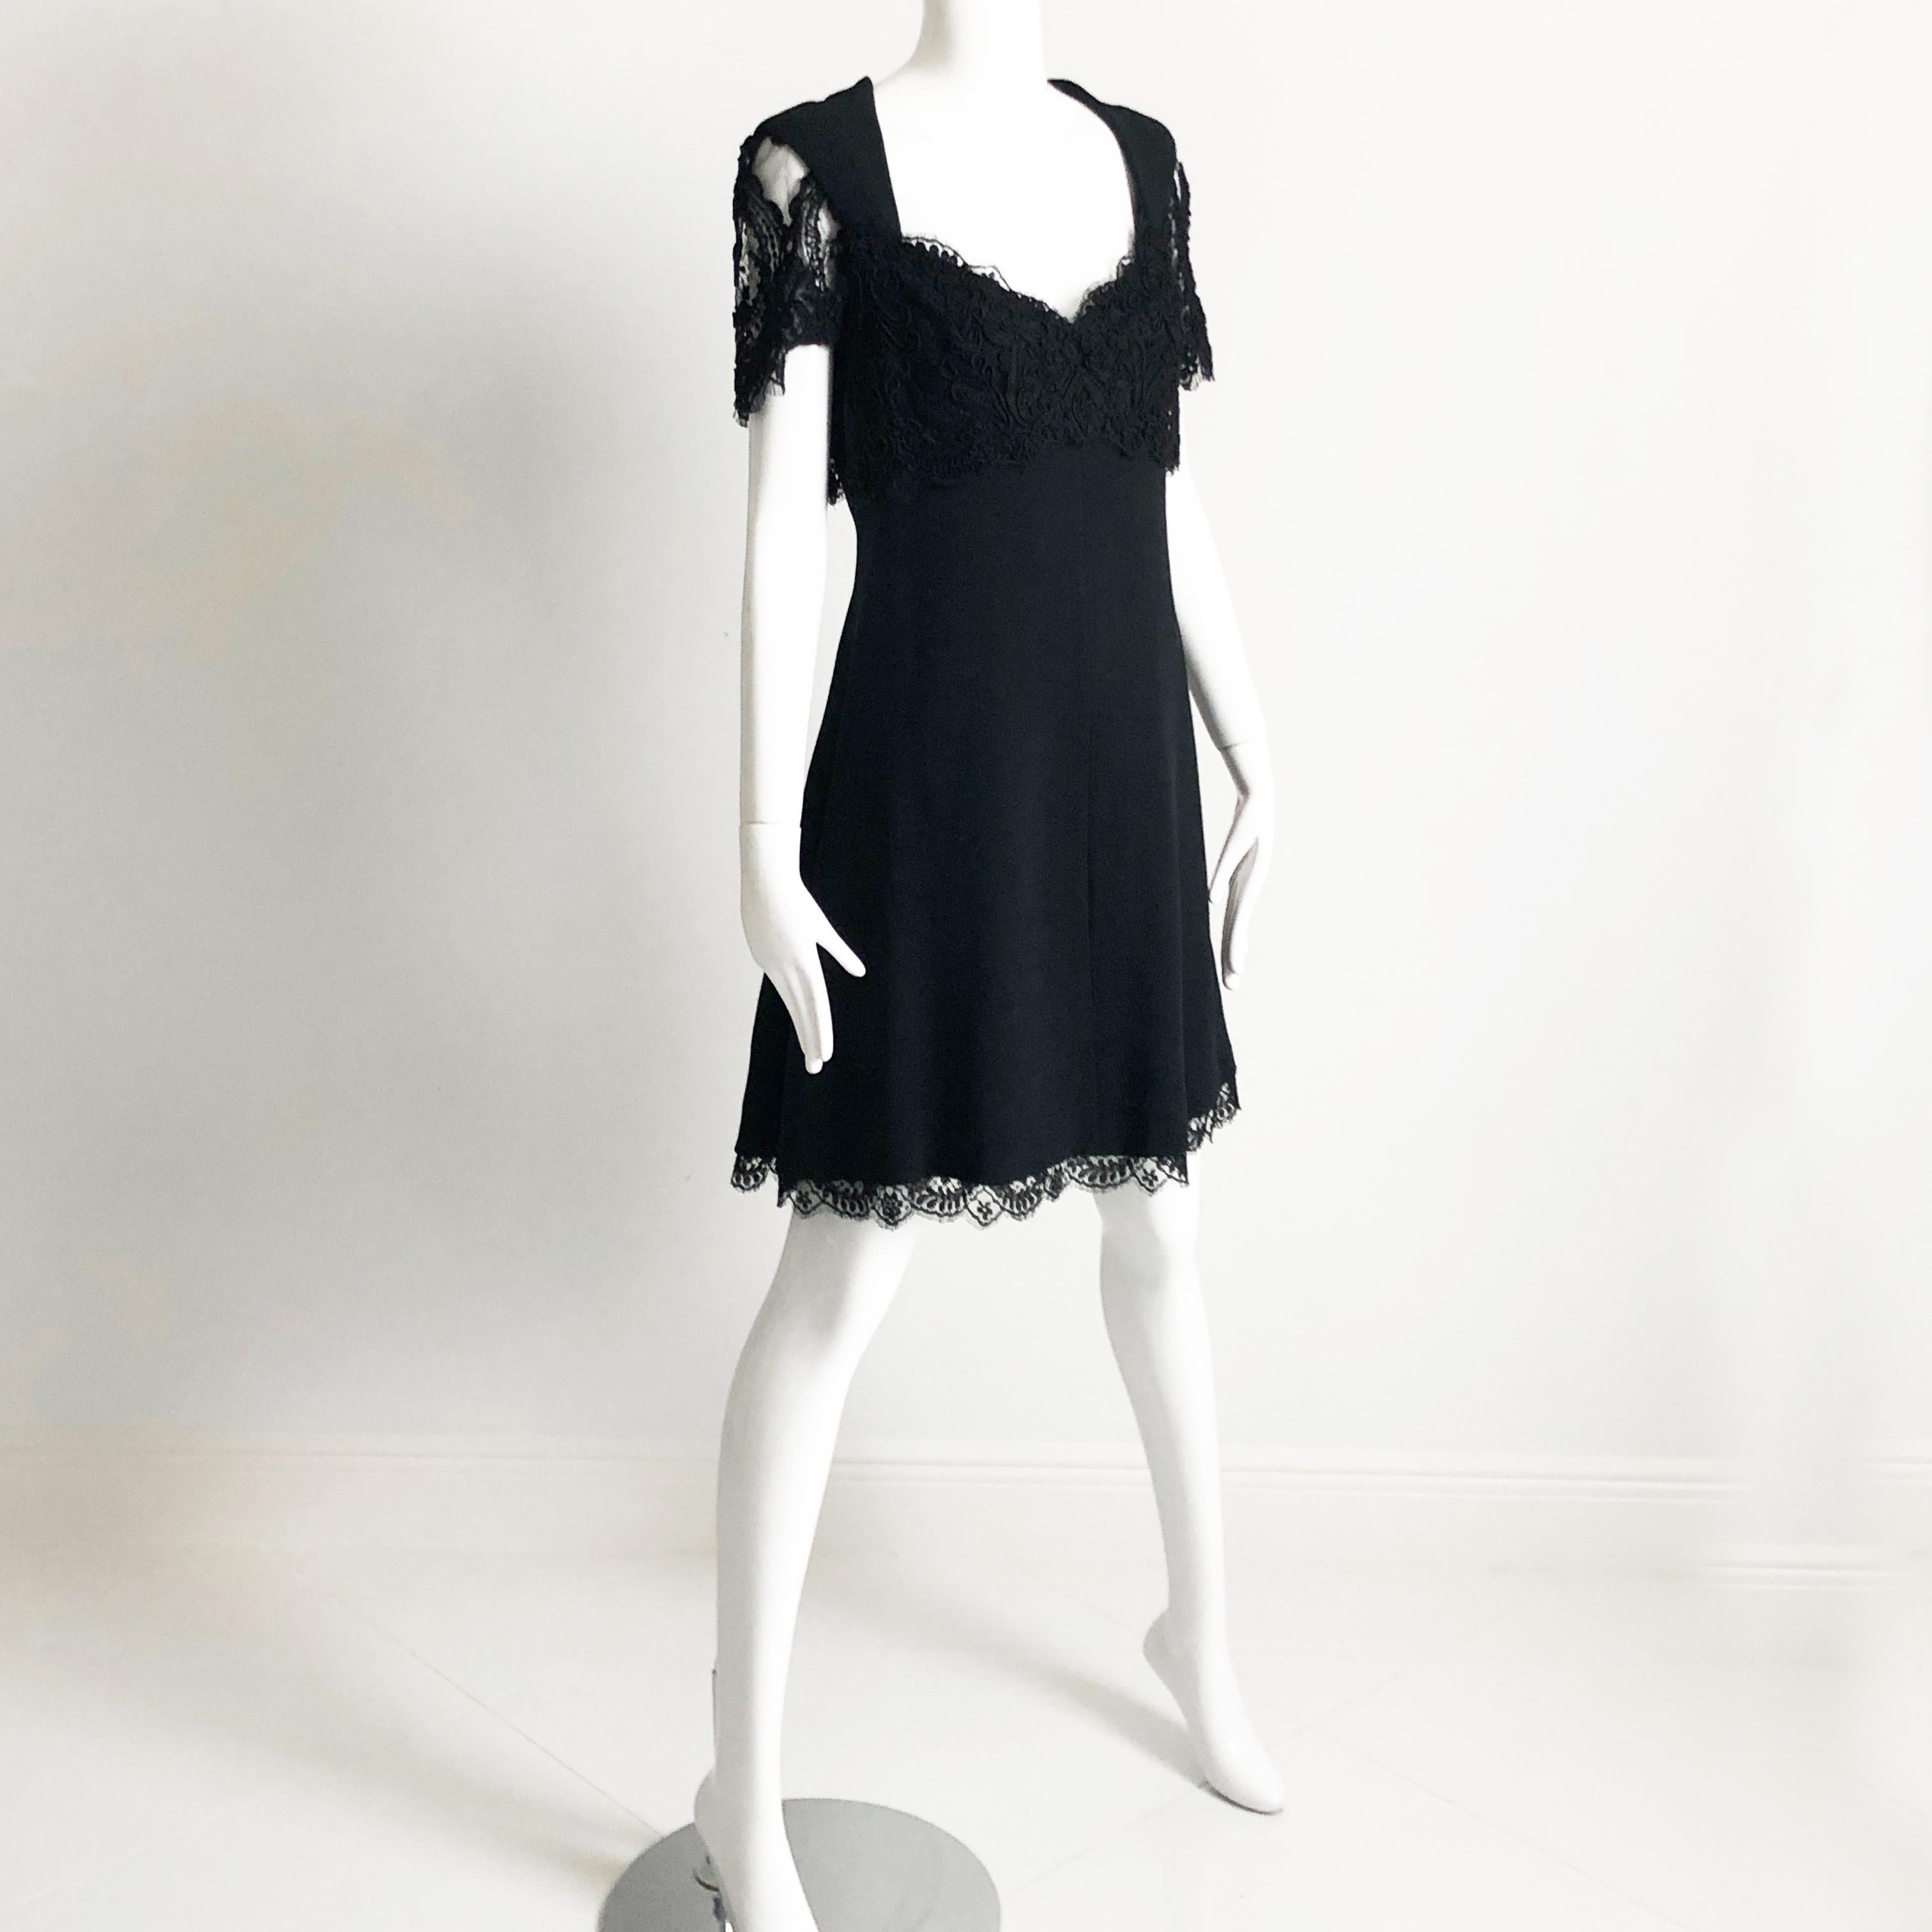 Preowned, vintage little black dress, designed by Louis Feraud, most likely in the late 80s or early 90s.  Made from black fabric it features a gorgeous scalloped lace panel across the front chest and back areas and lace sleeves and hem

The perfect